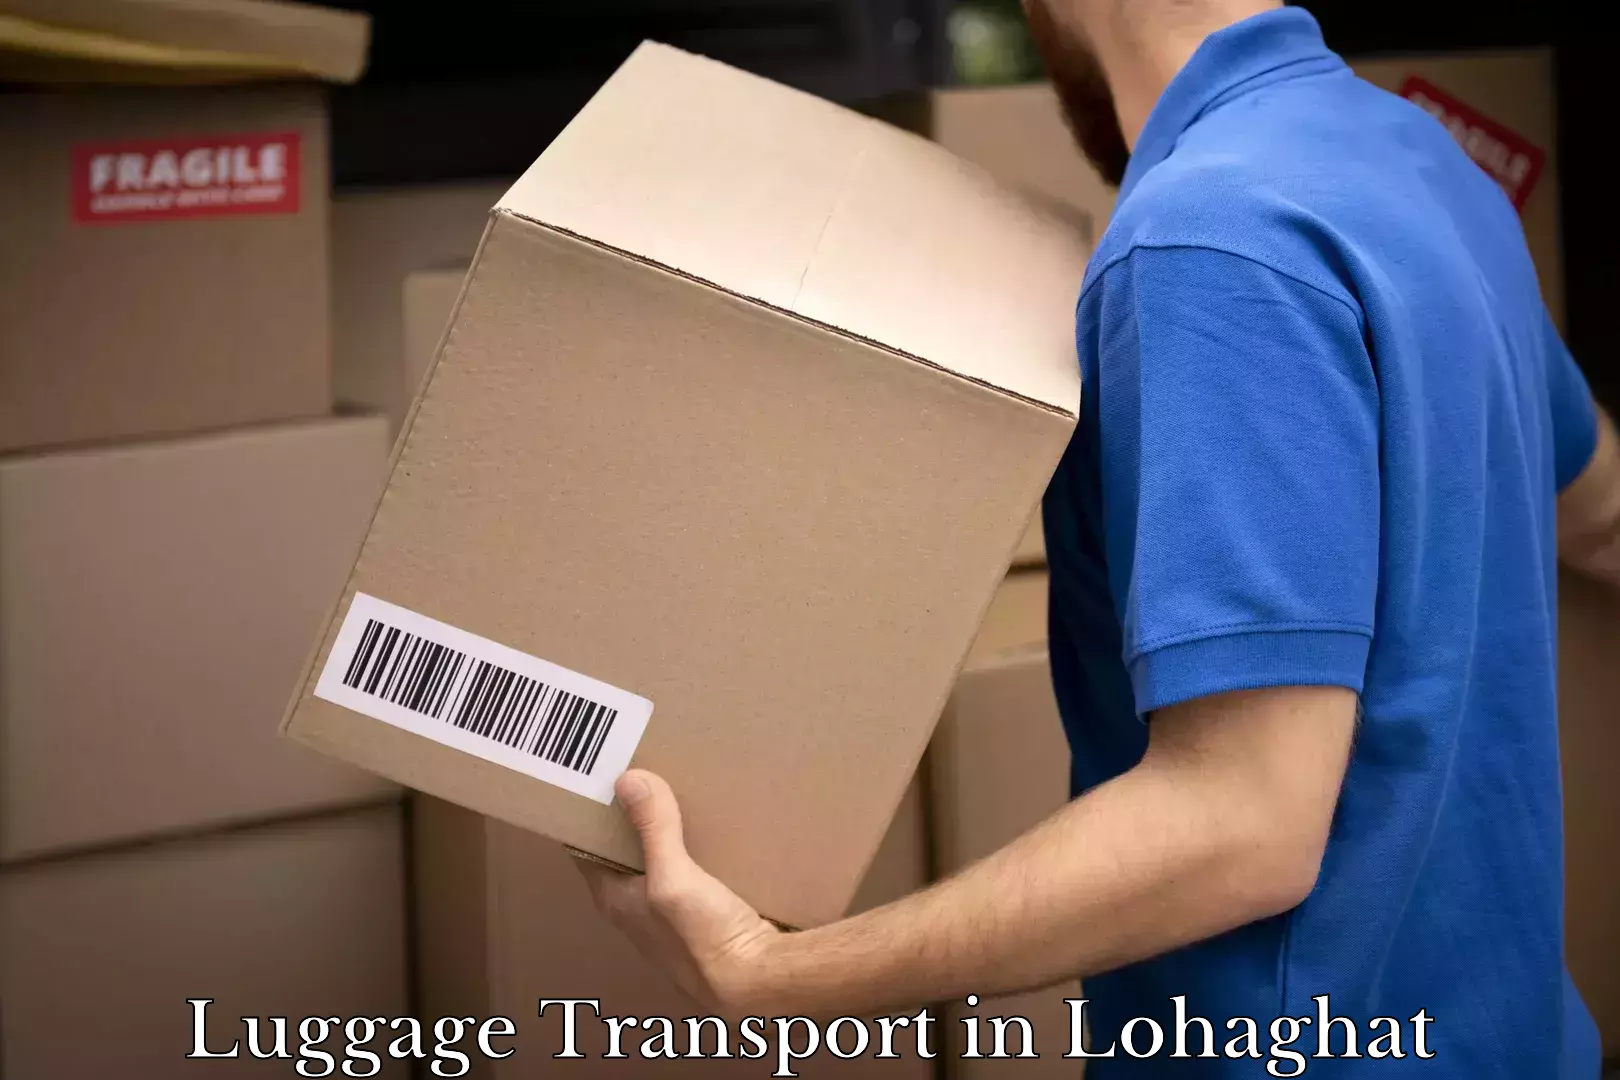 Baggage transport network in Lohaghat